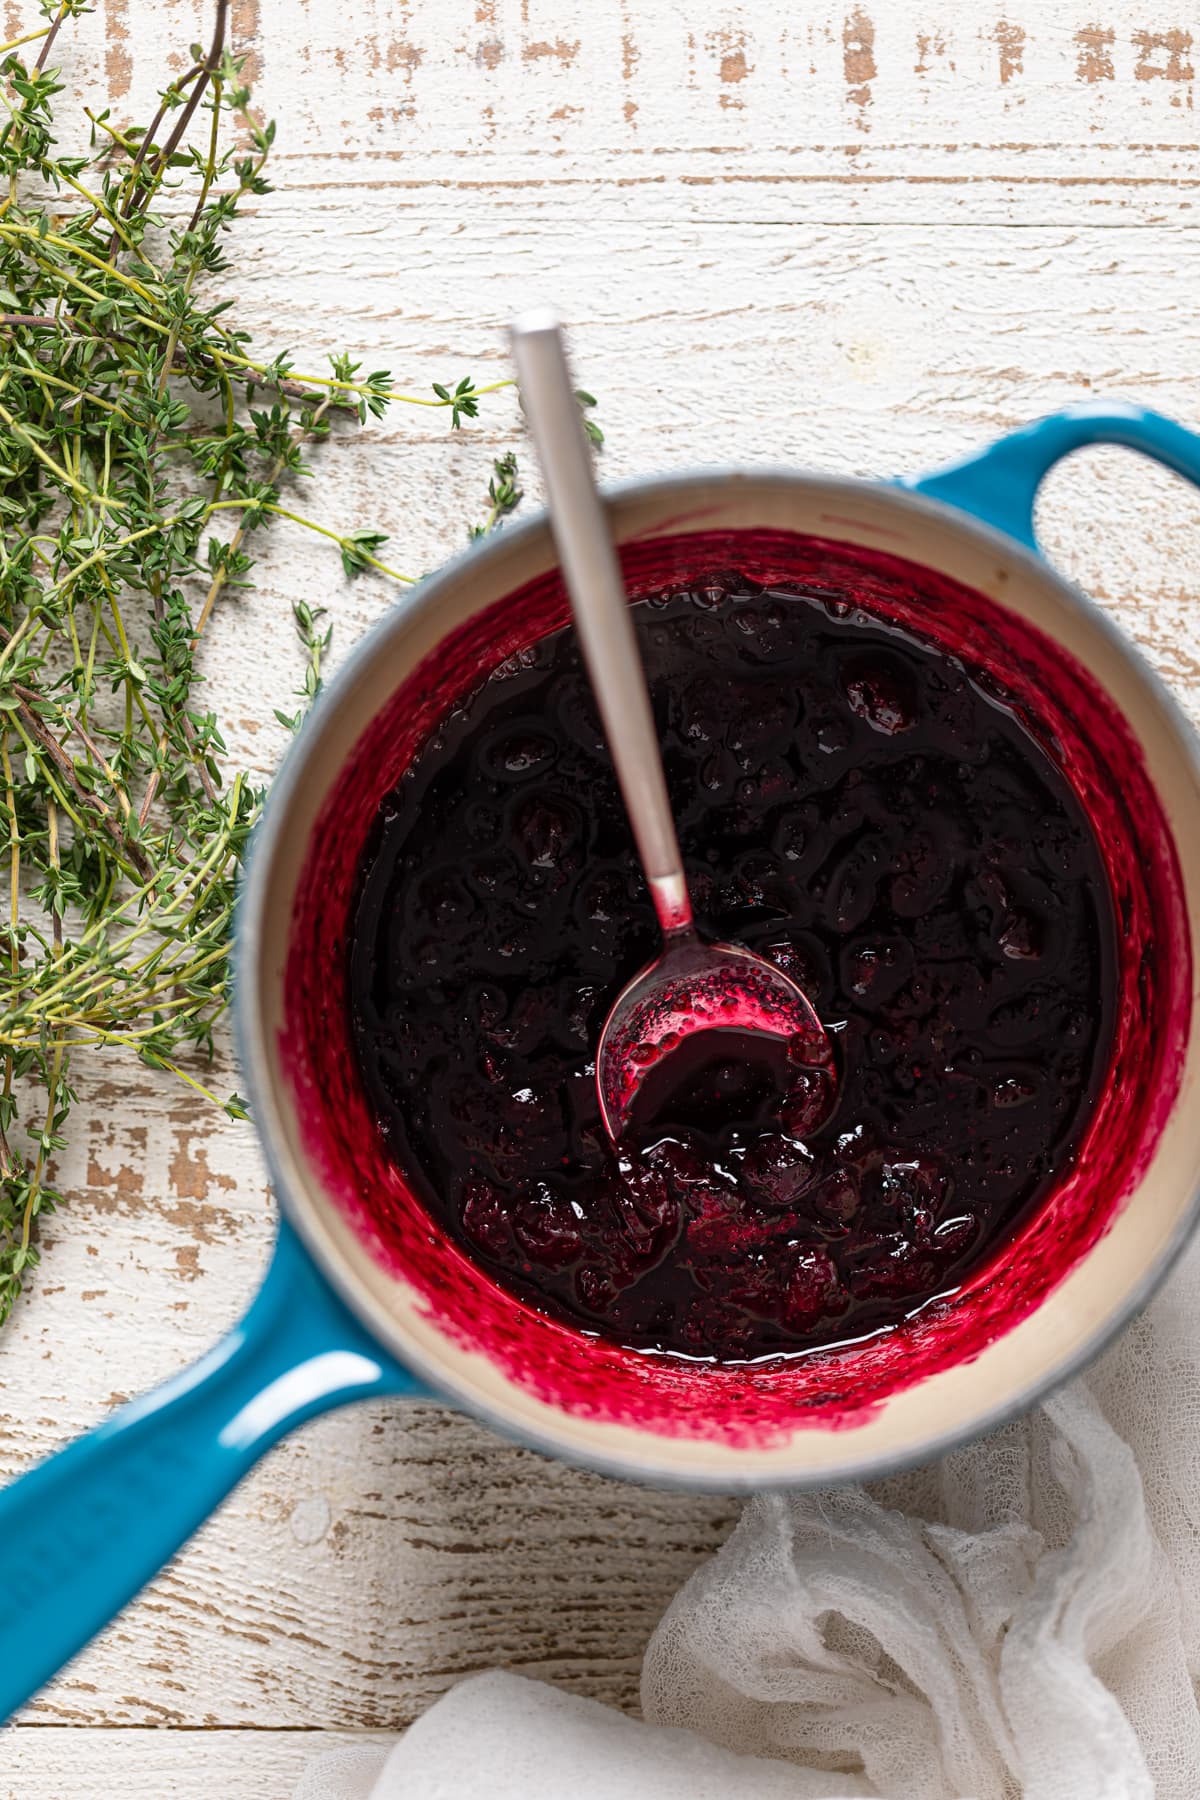 Spoon in a pan of blueberry compote